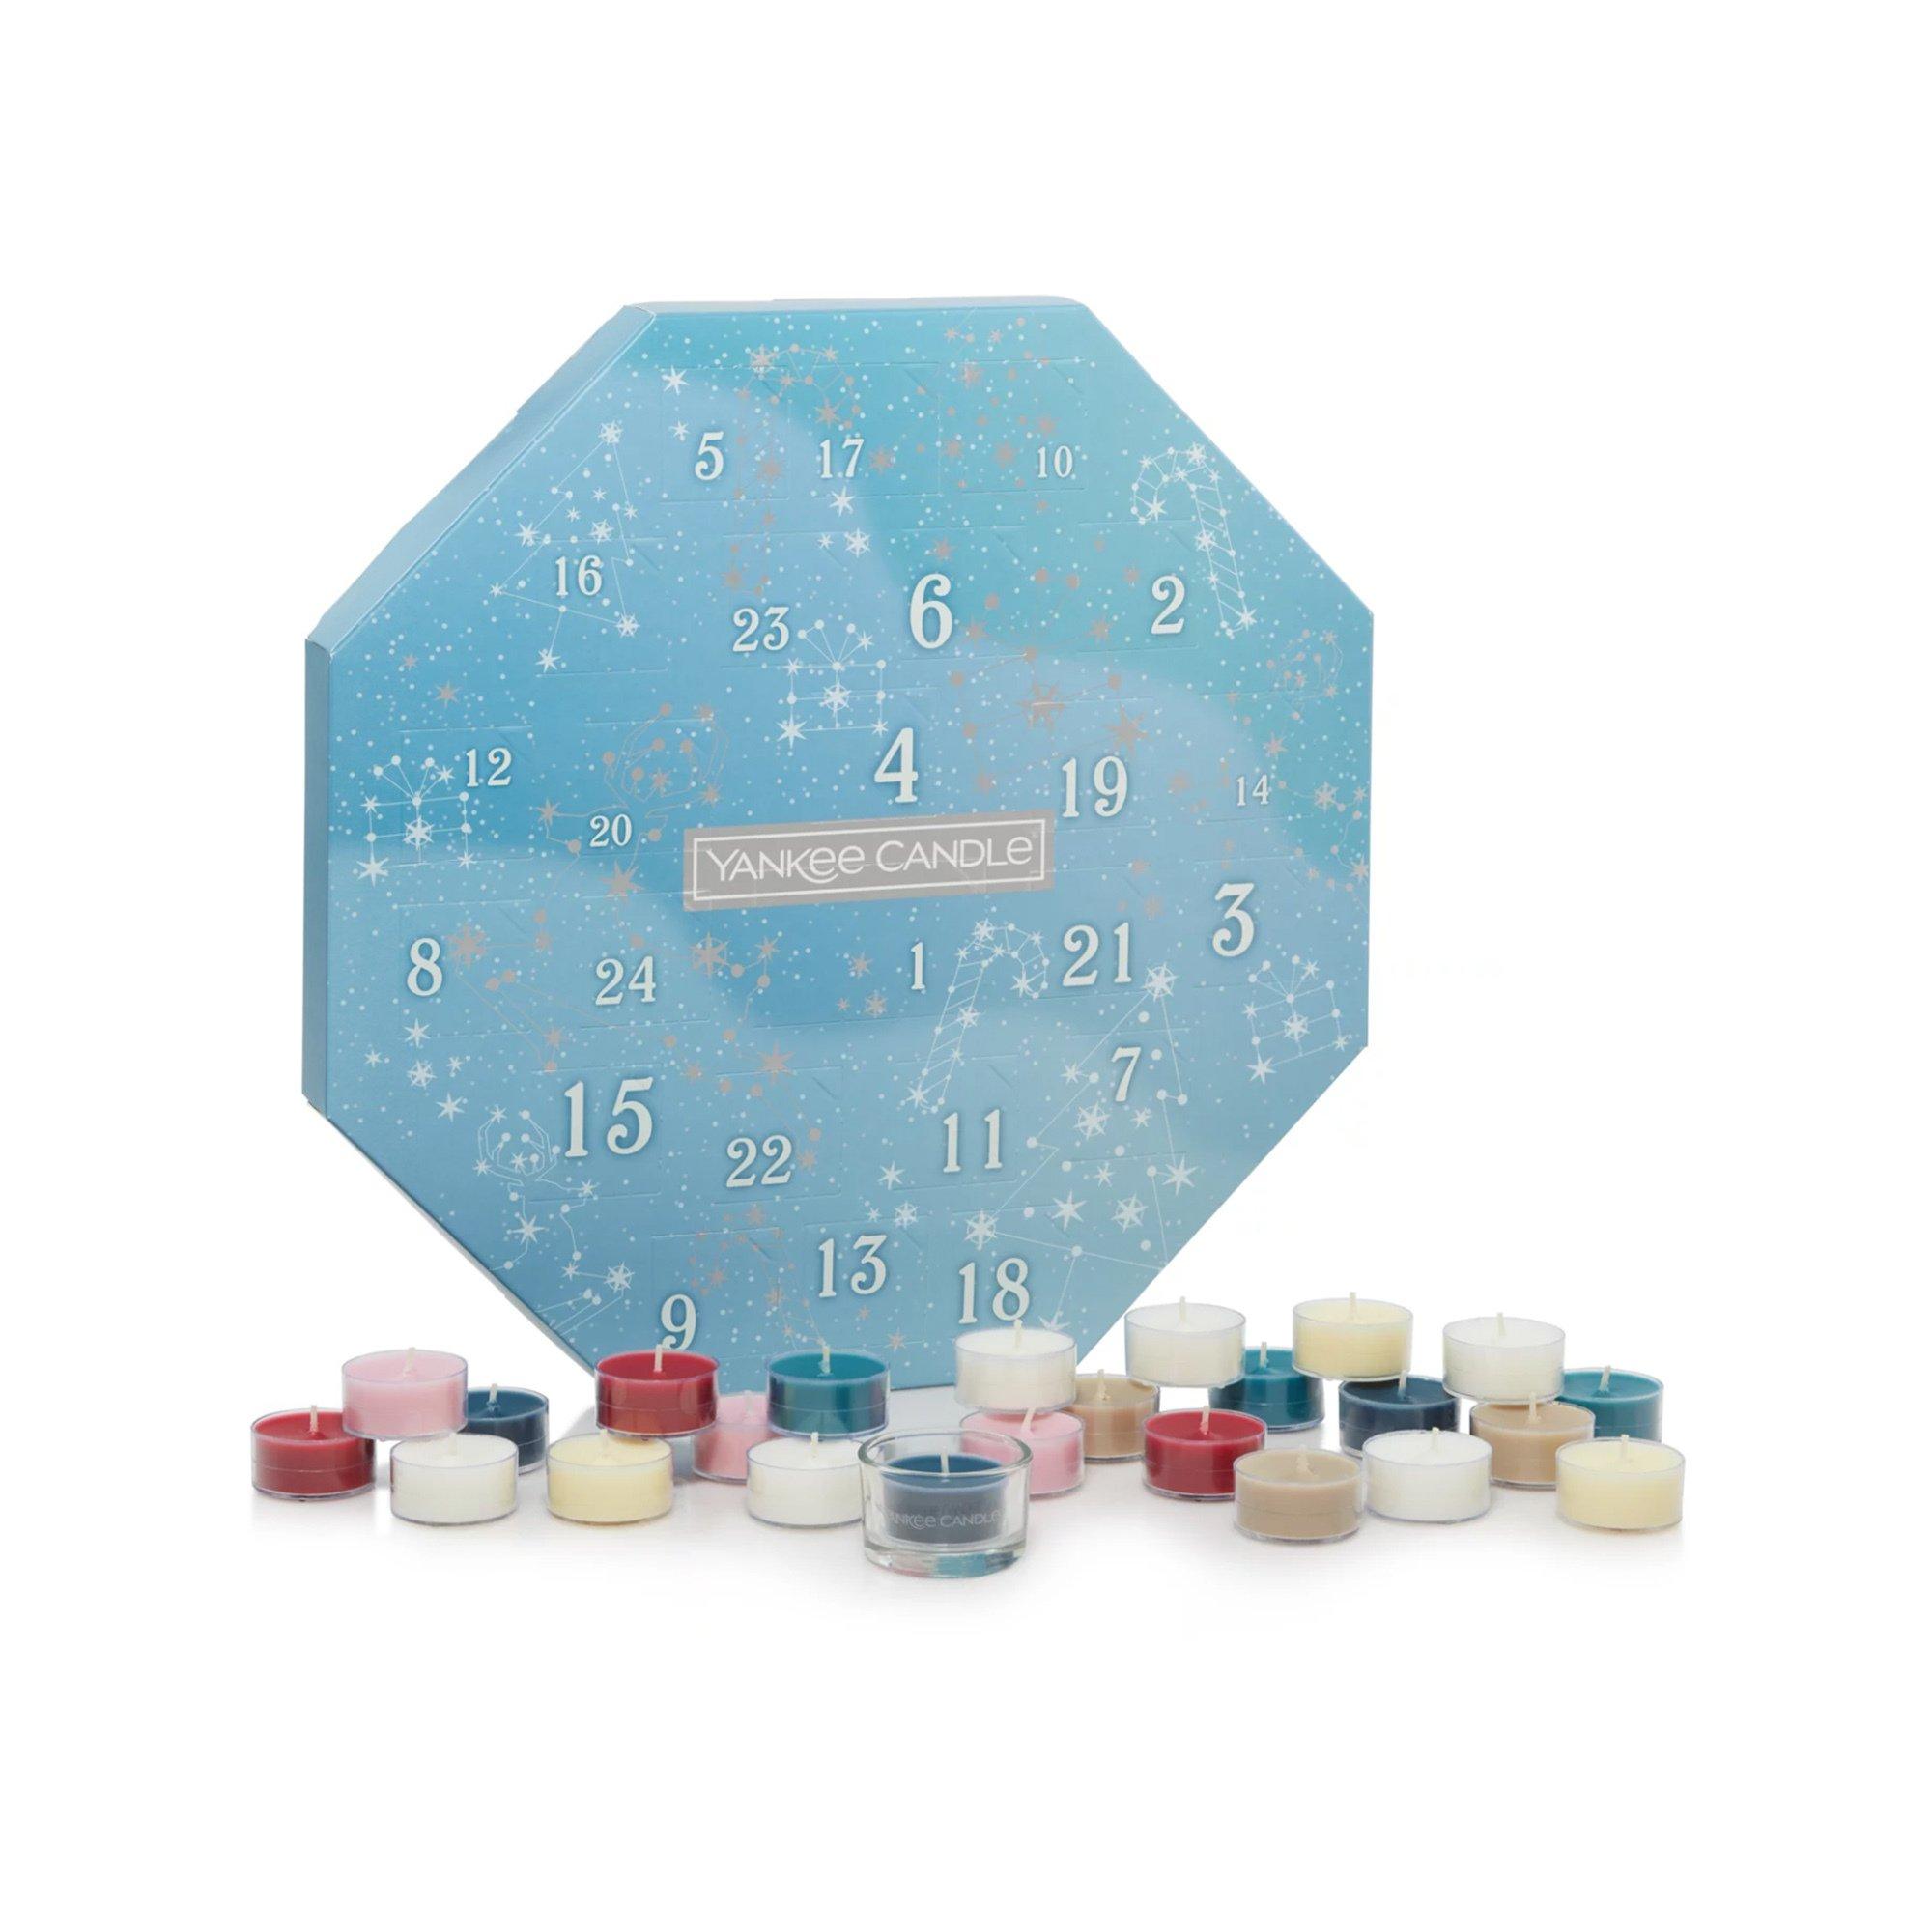 Yankee Candle Signature Calendrier de l'Avent Bougies parfumées Holiday Bright Lights Advent Wreath 